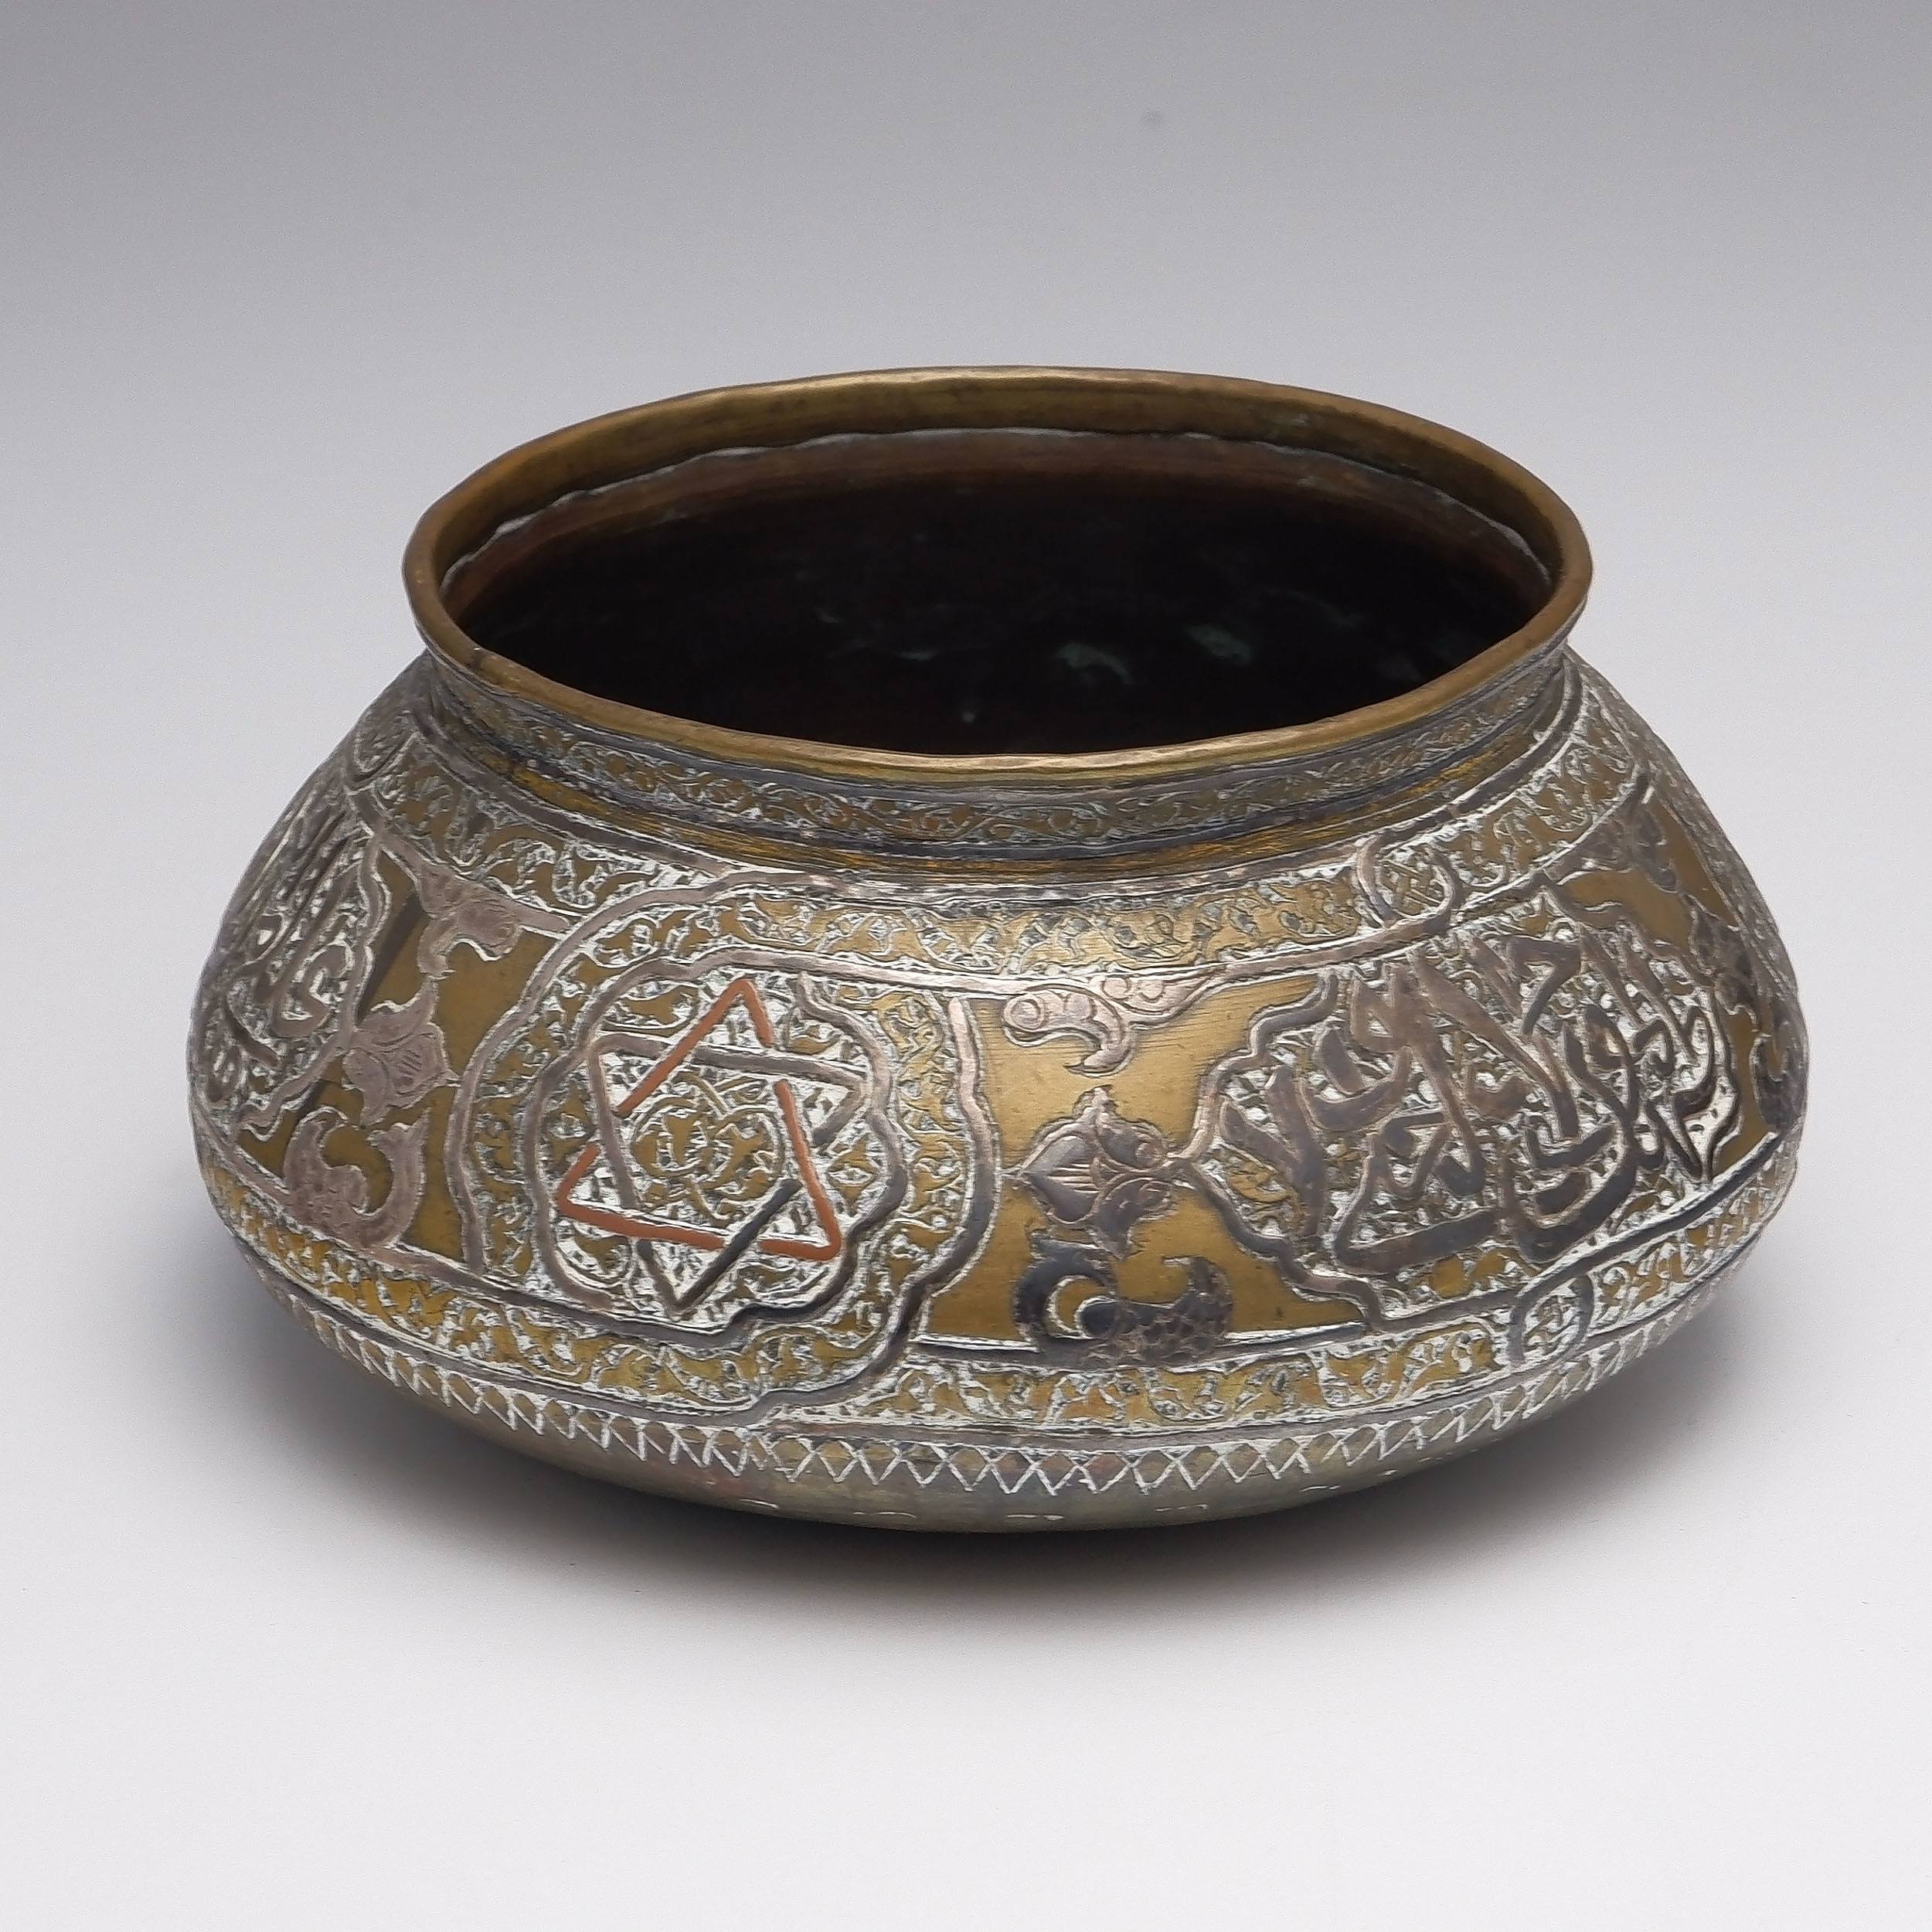 'Silver and Copper Inlaid Brass Bowl with Arabic Cartouches and Star of David, Cairo or Damascus Circa 1900'